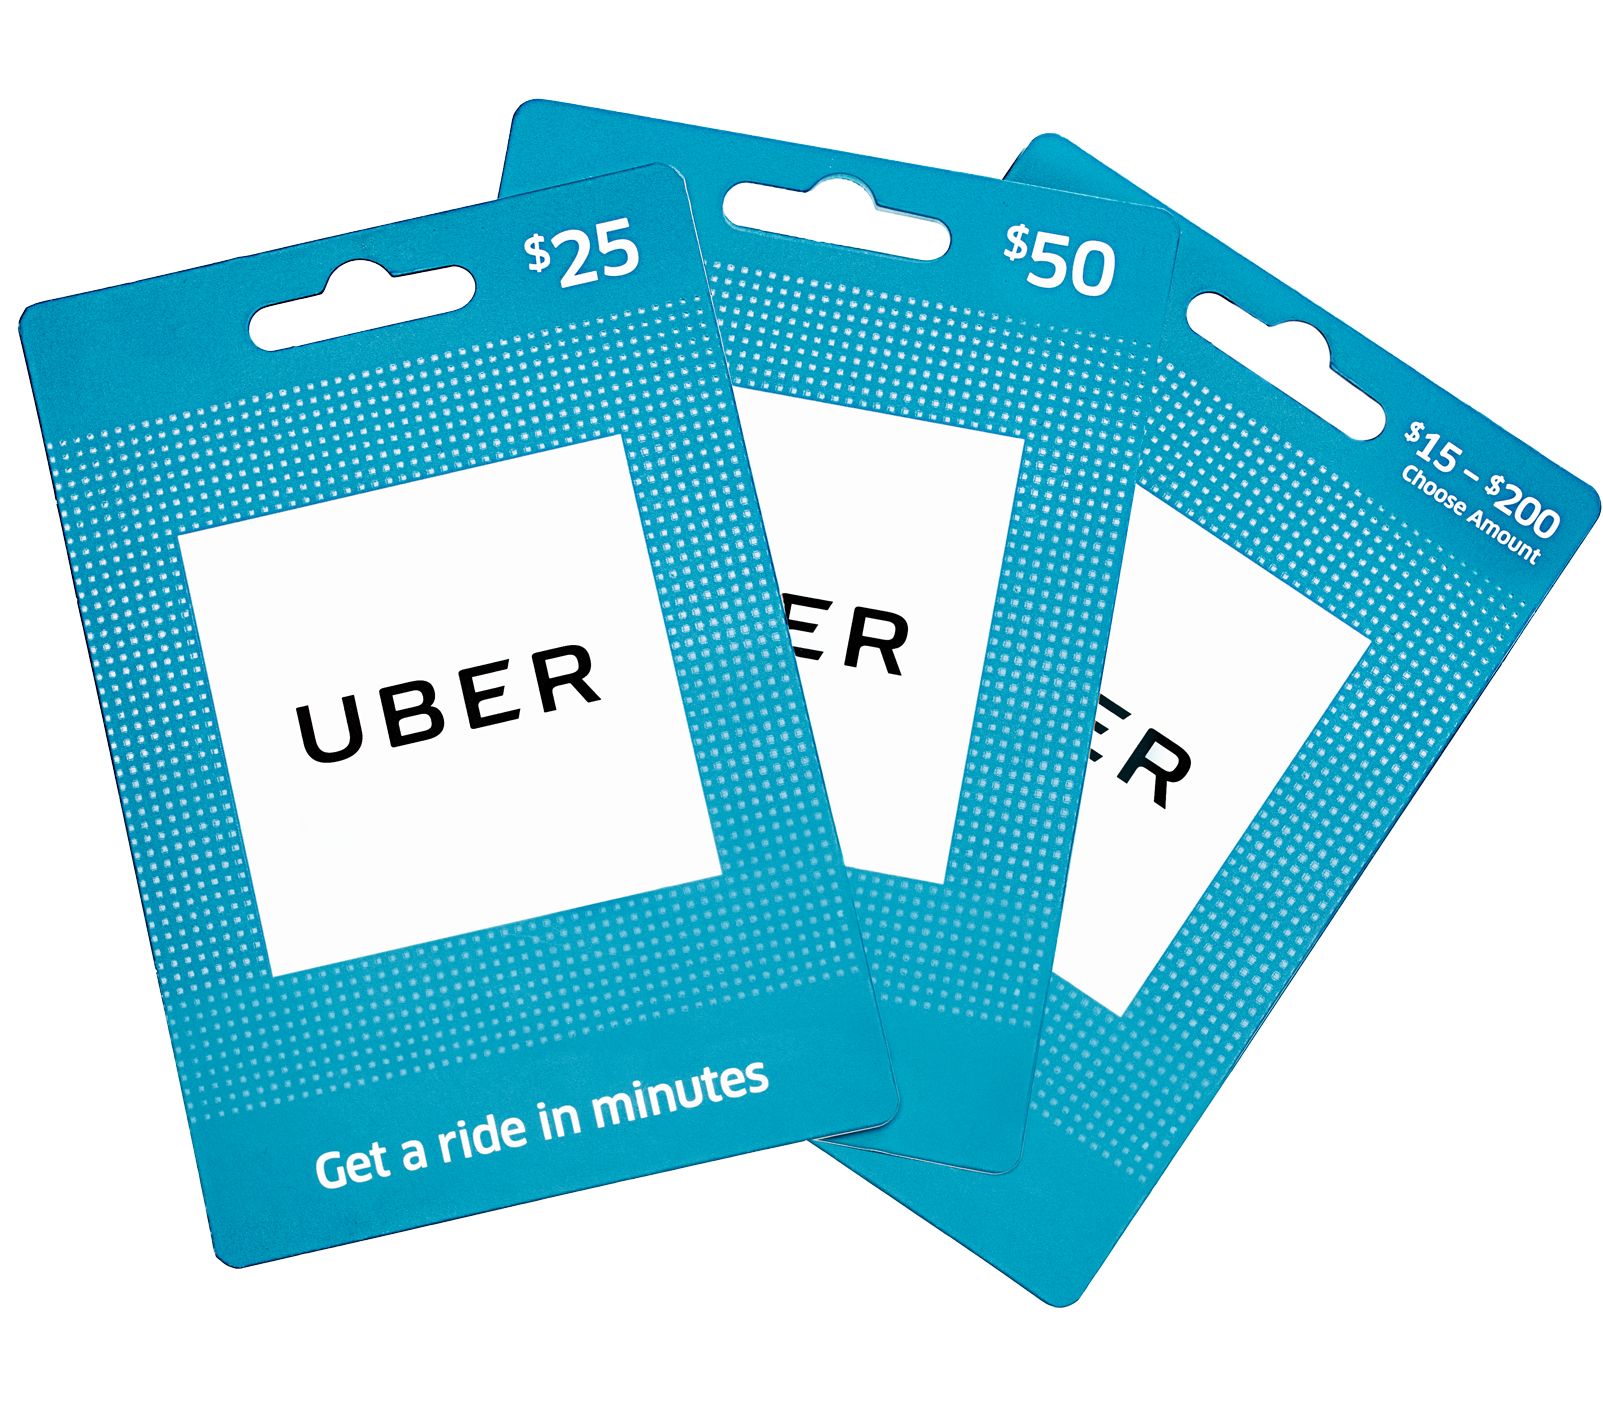 ubereats business cards 3